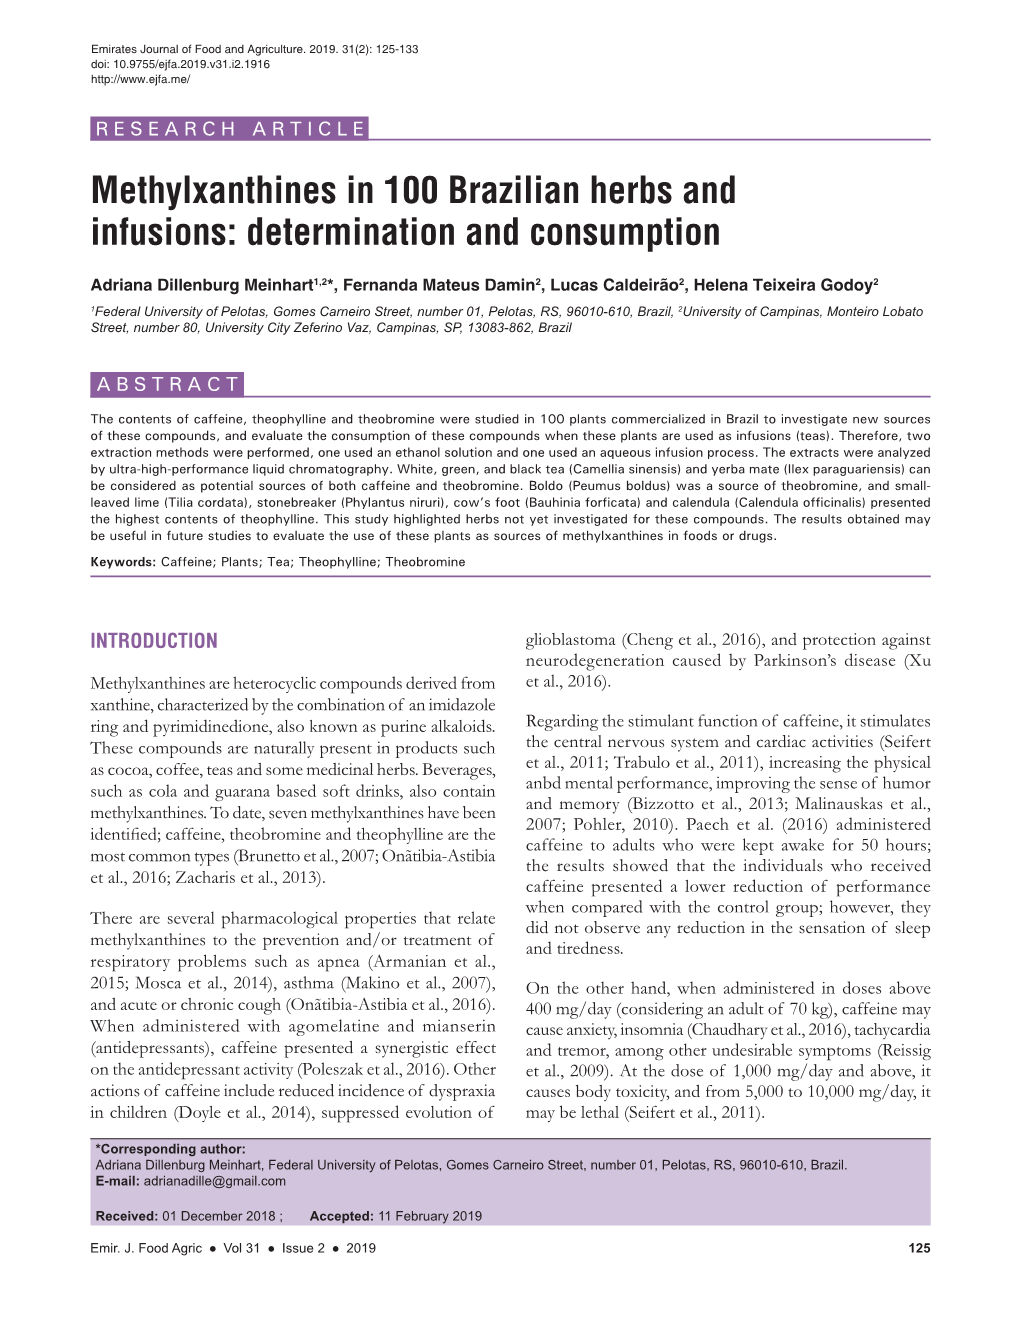 Methylxanthines in 100 Brazilian Herbs and Infusions: Determination and Consumption